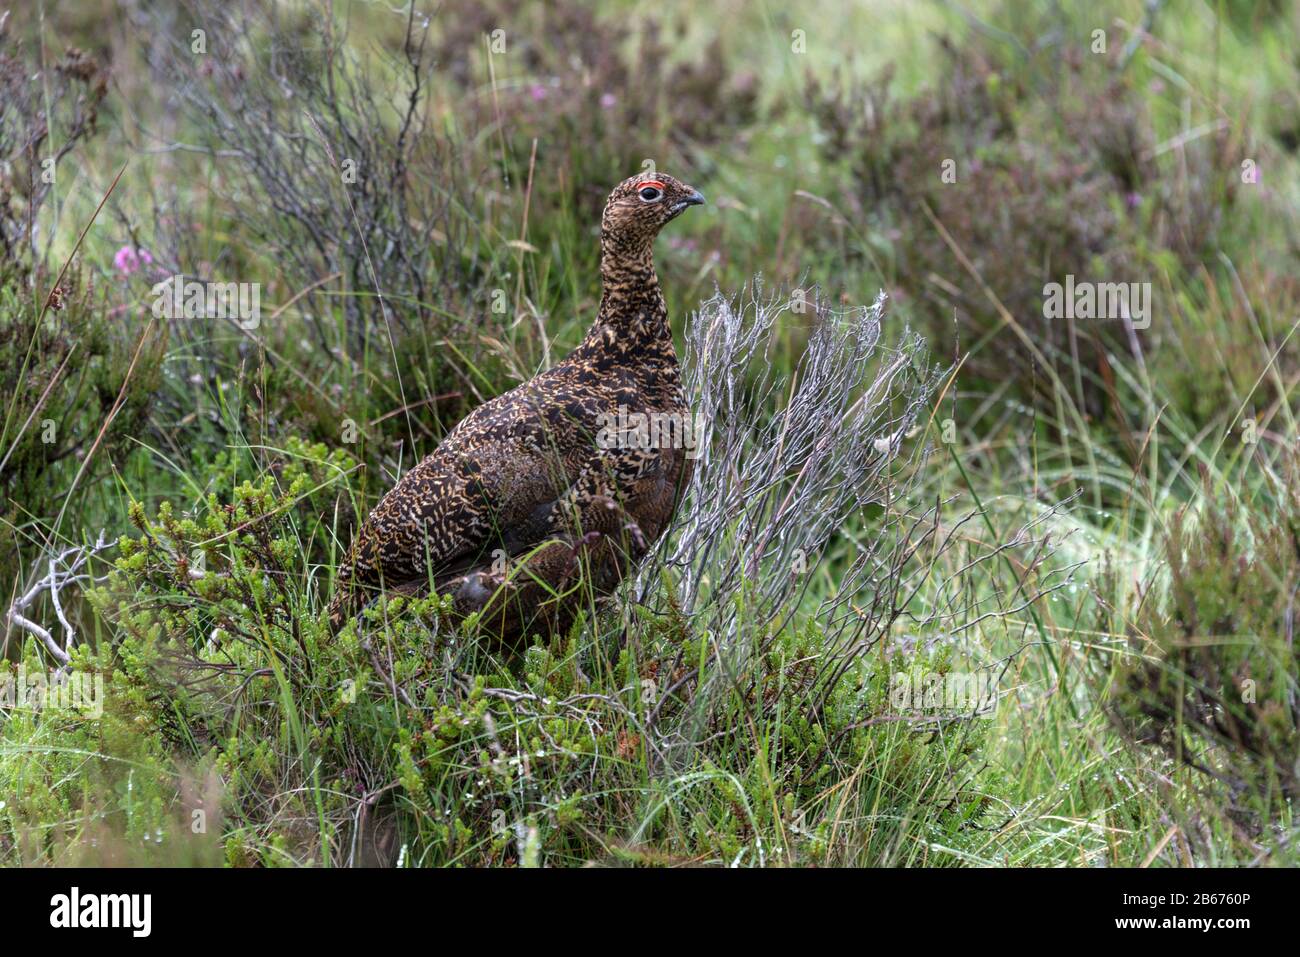 A red grouse hen, a game bird, wondering in the heather-covered moorland at Bramsdale Moor in the North York Moors National Park in Britain.  Bramsdal Stock Photo